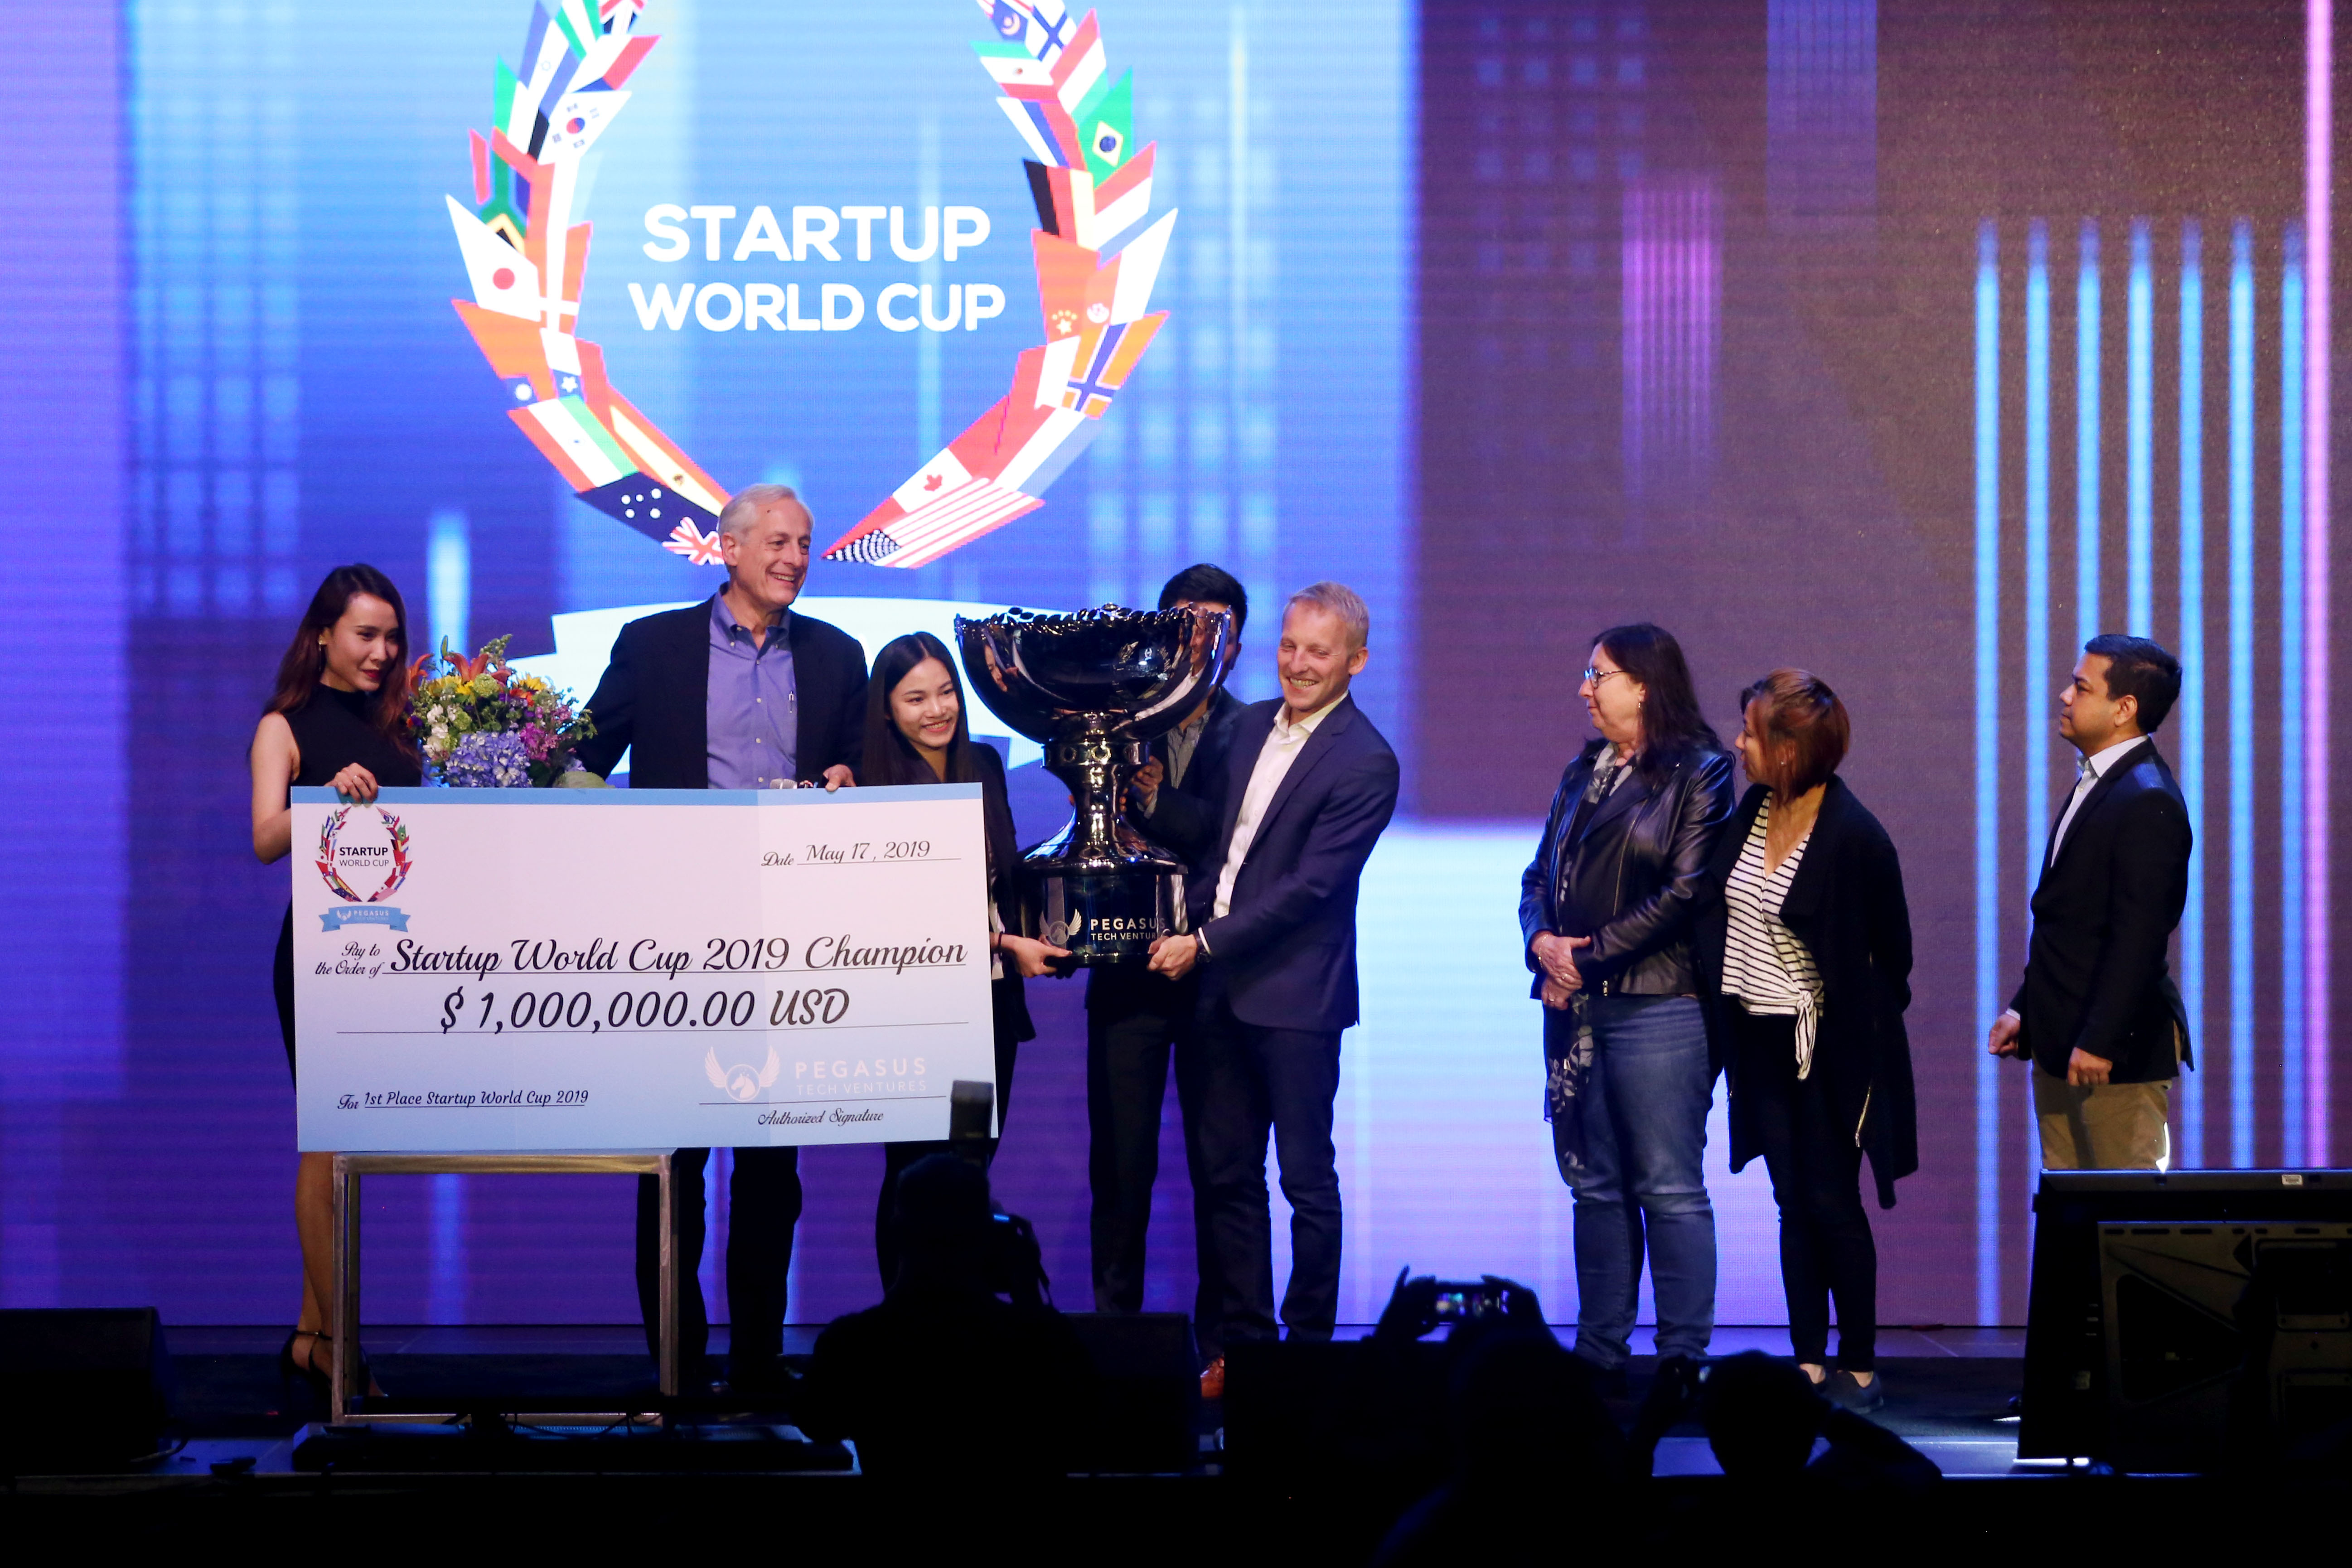 Vietnam's Abivin wins 1m grand prize at Startup World Cup